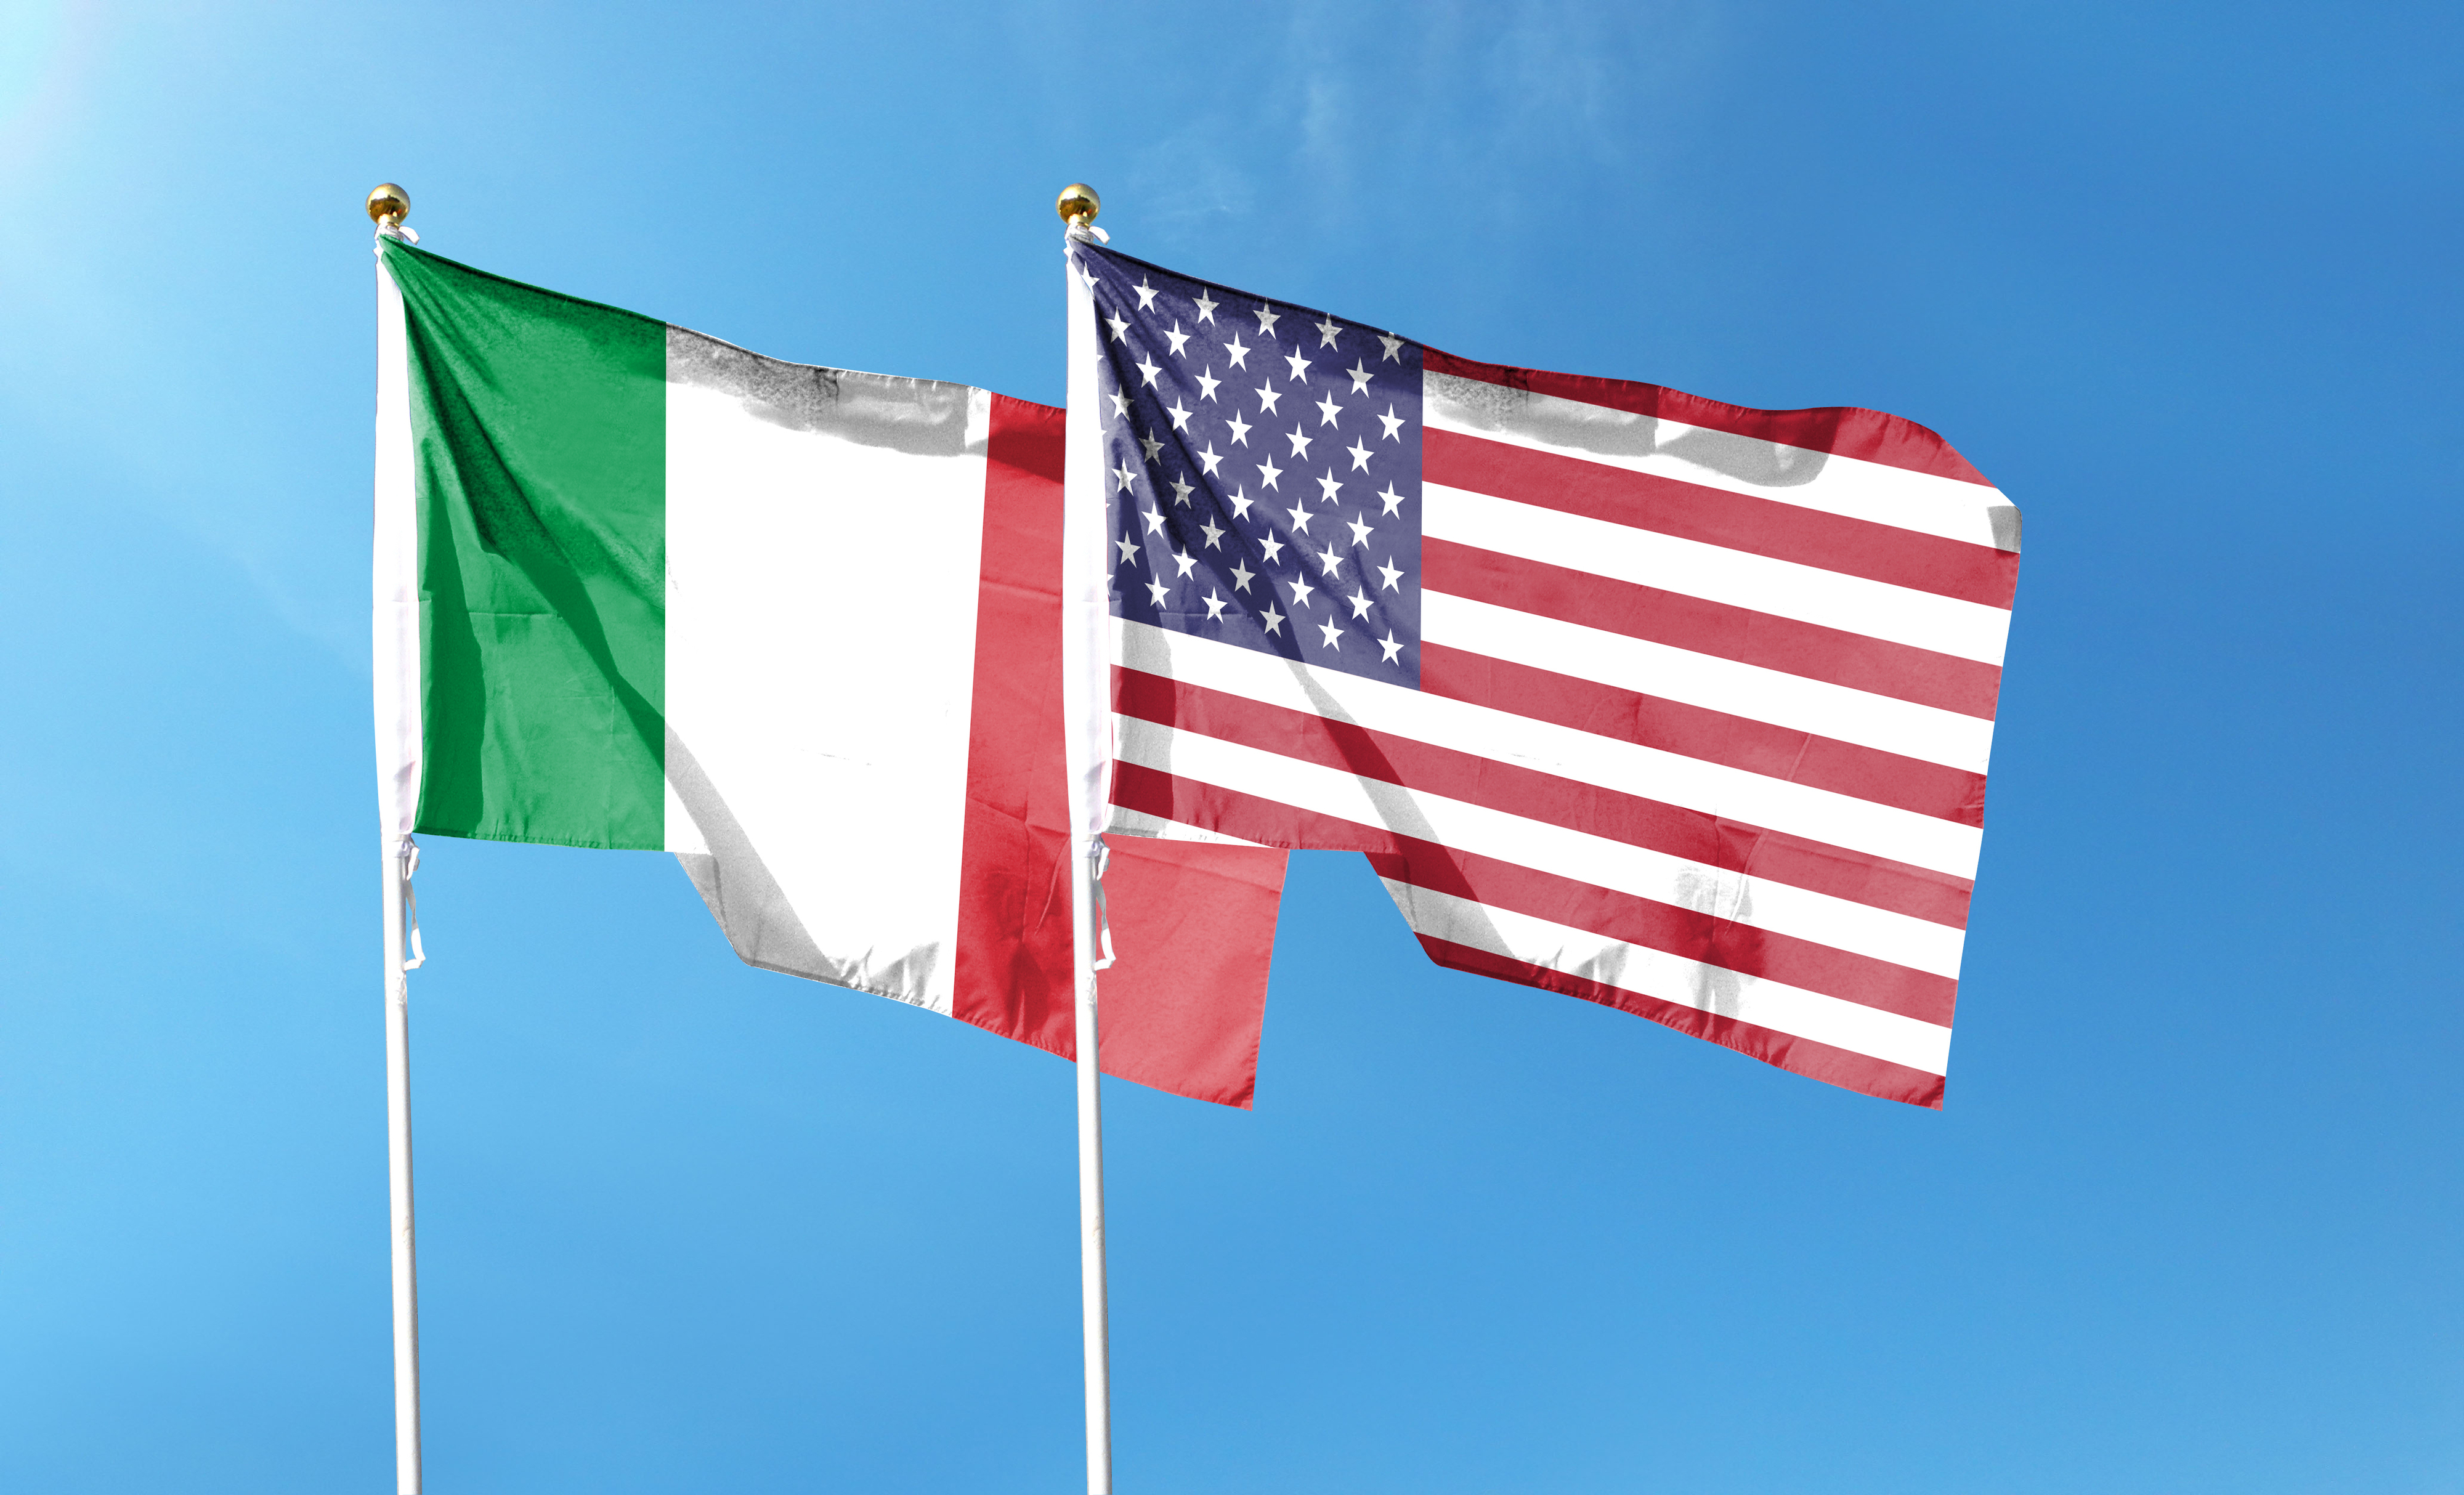 Italian and American flags side by side on poles against a clear sky